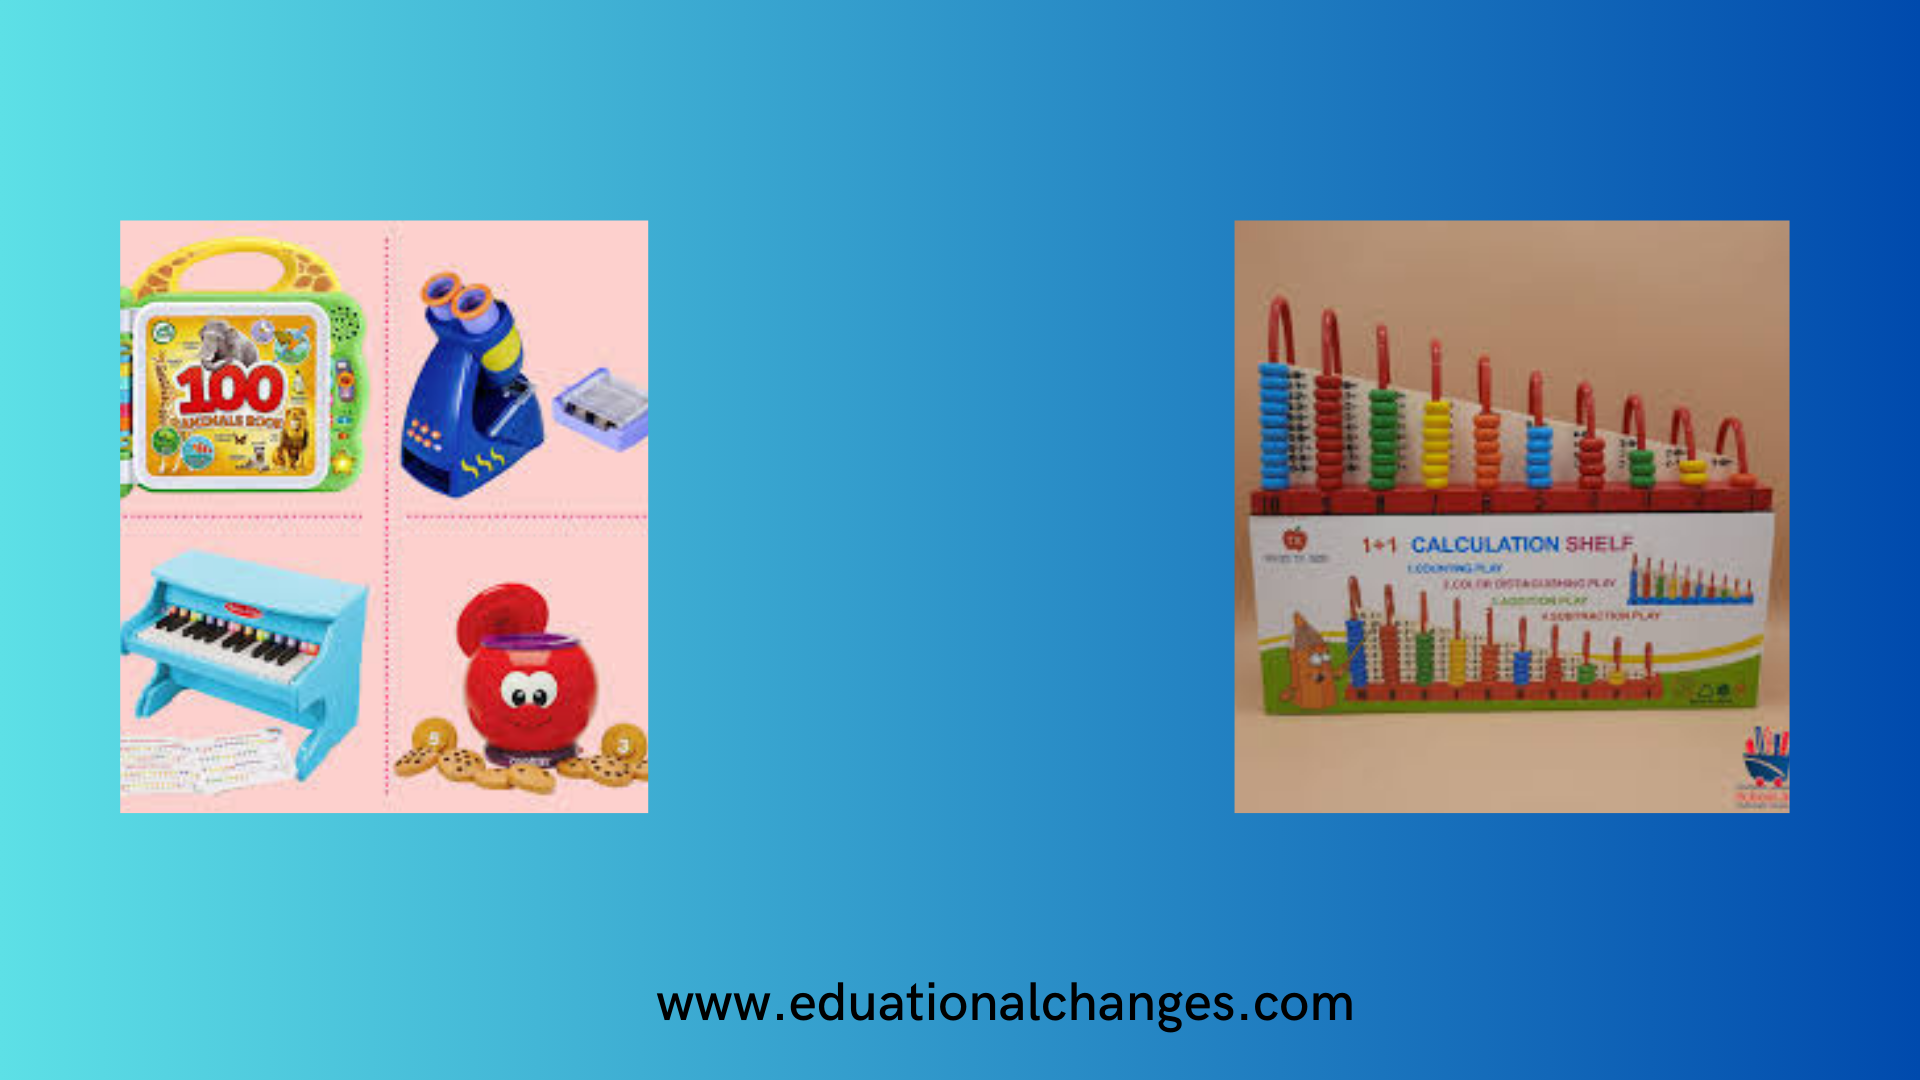 Growing Need for Educational Toys